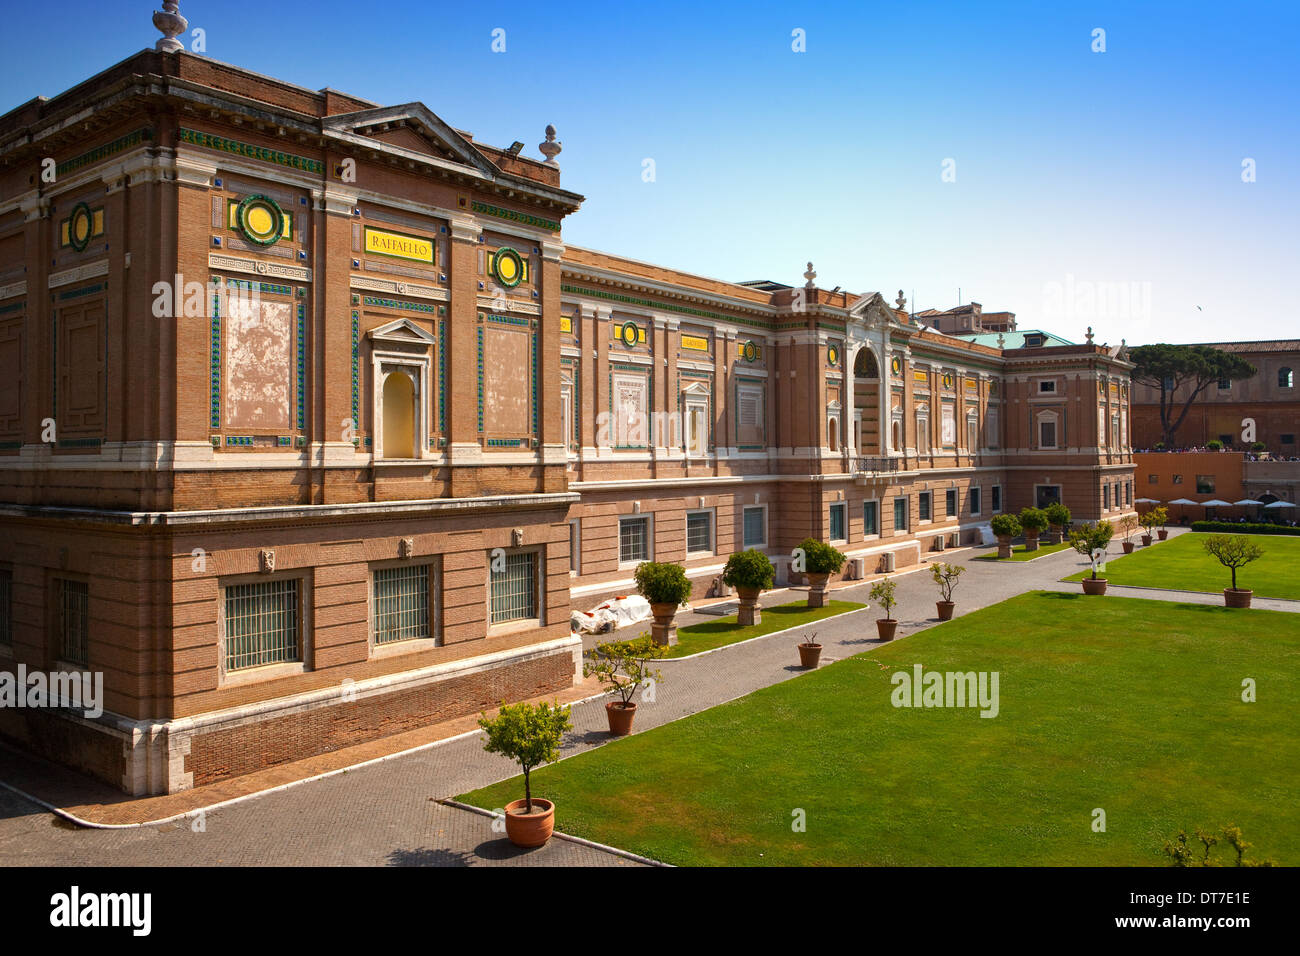 View on Vatican Museum in Rome, Italy Stock Photo